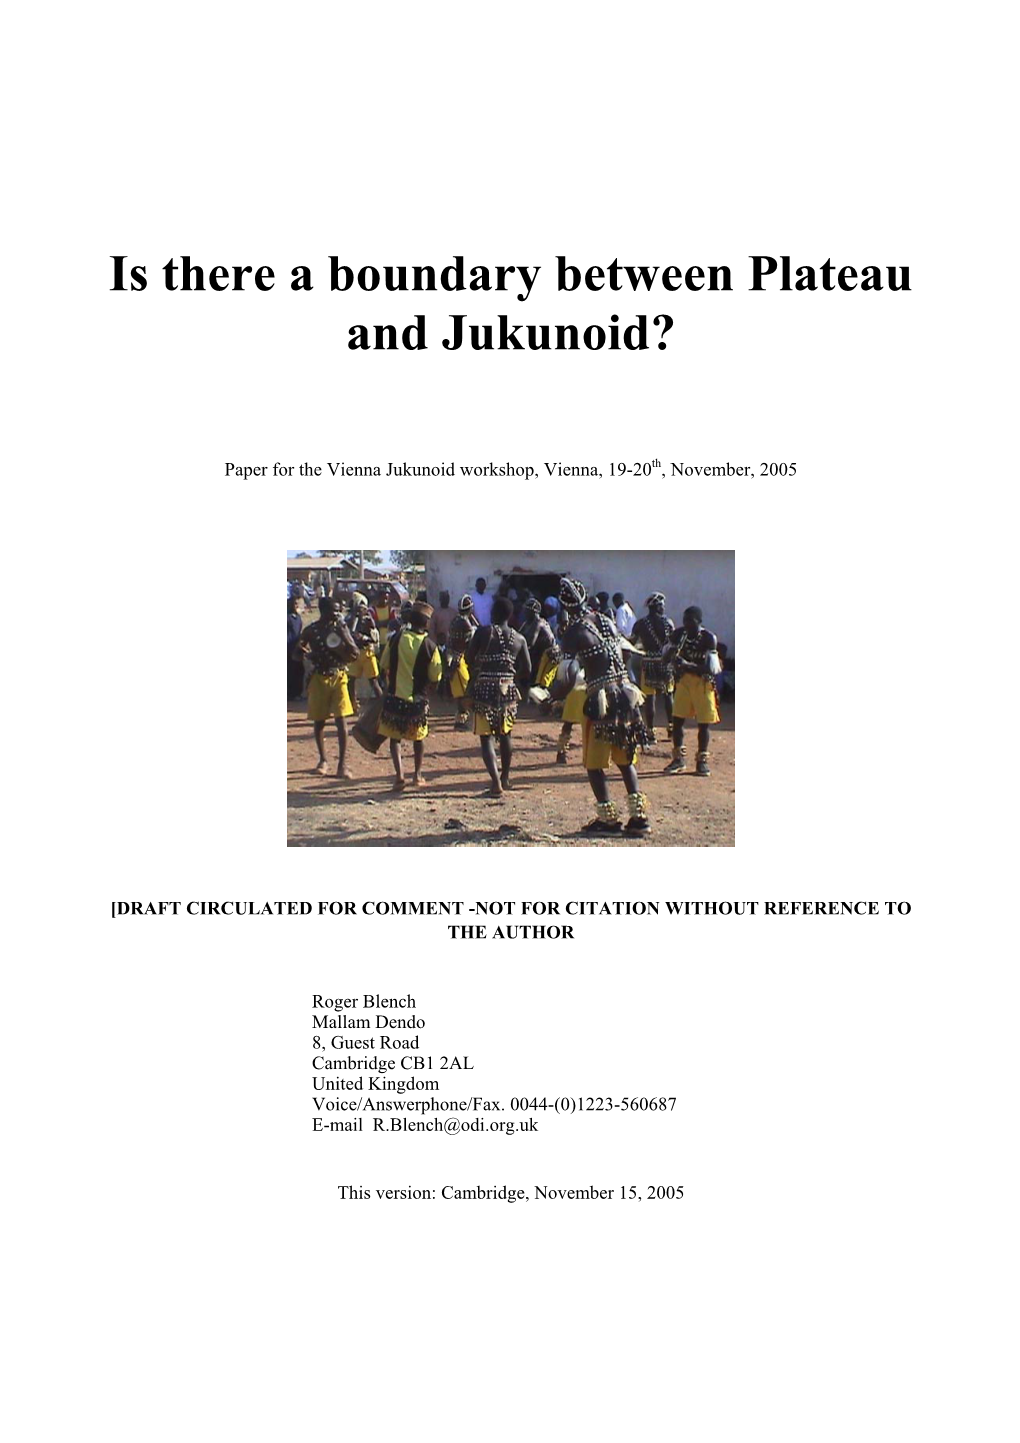 Is There a Boundary Between Plateau and Jukunoid?